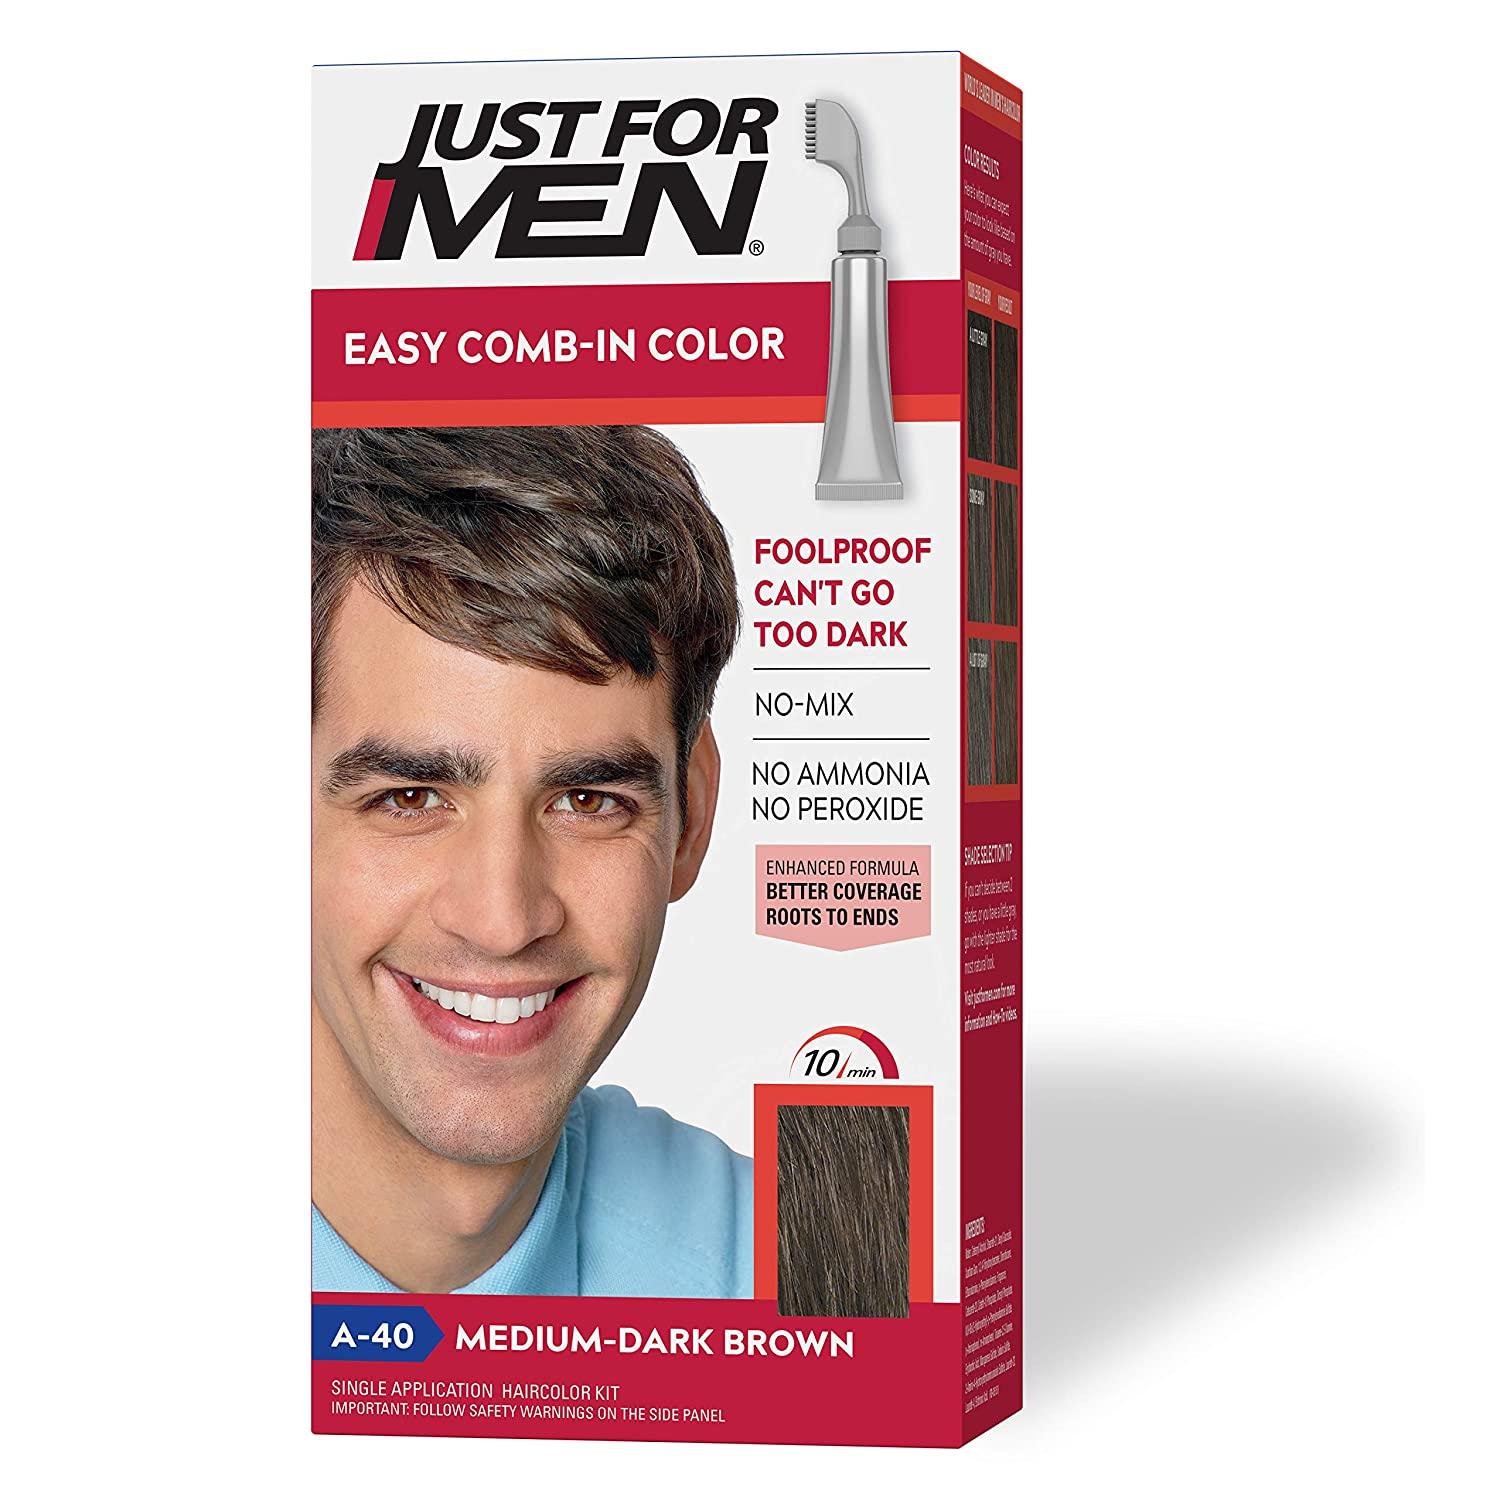 Just For Men Easy Comb-In Hair Color for $4.93